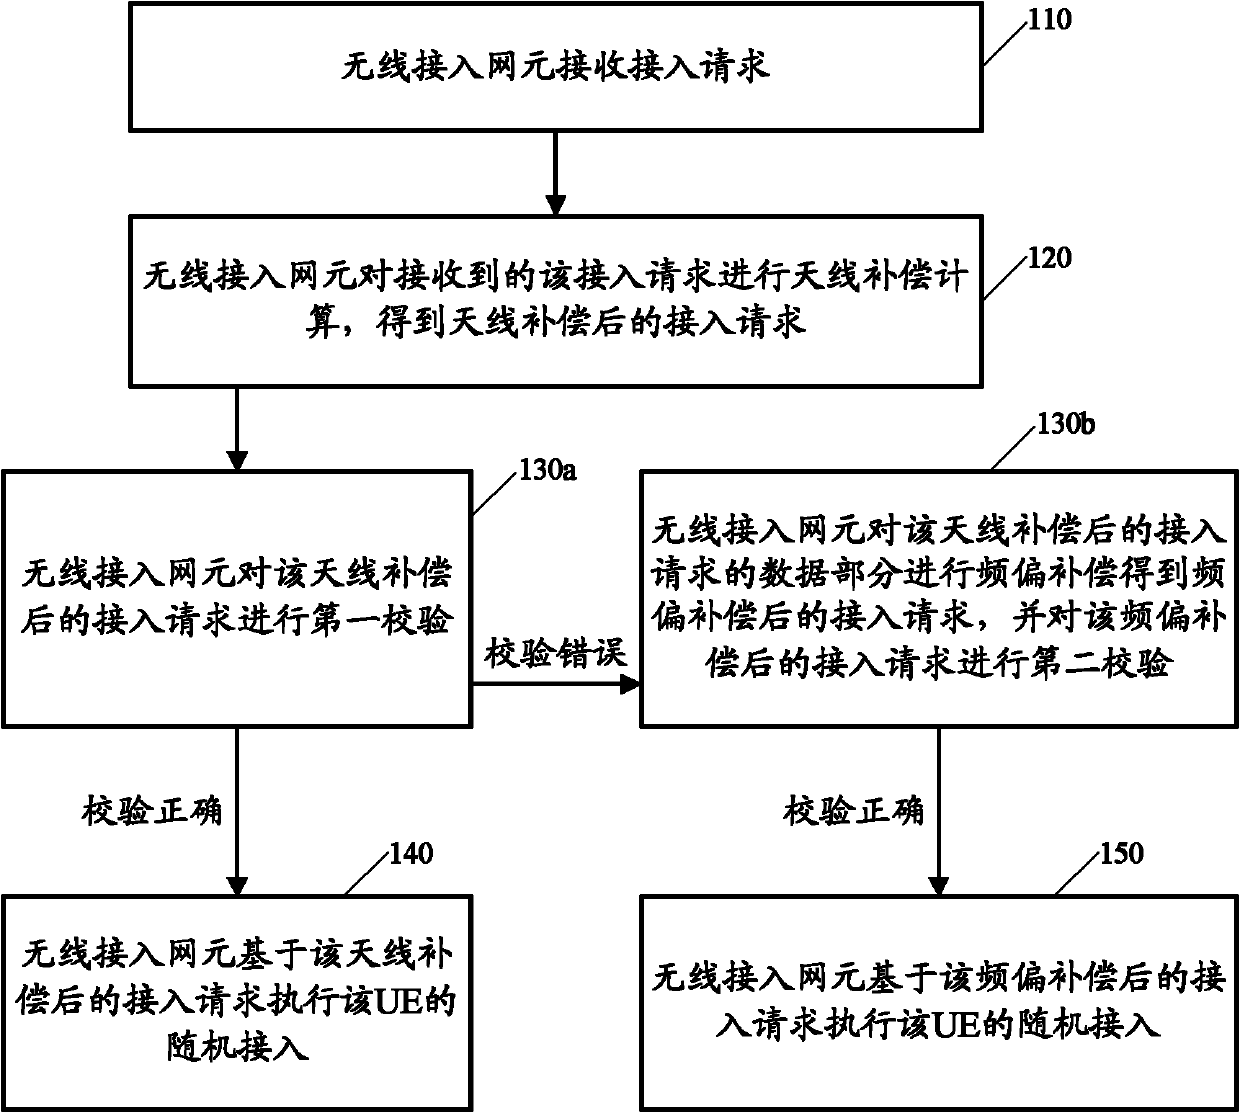 Random access method, wireless access network element and mobile communication system